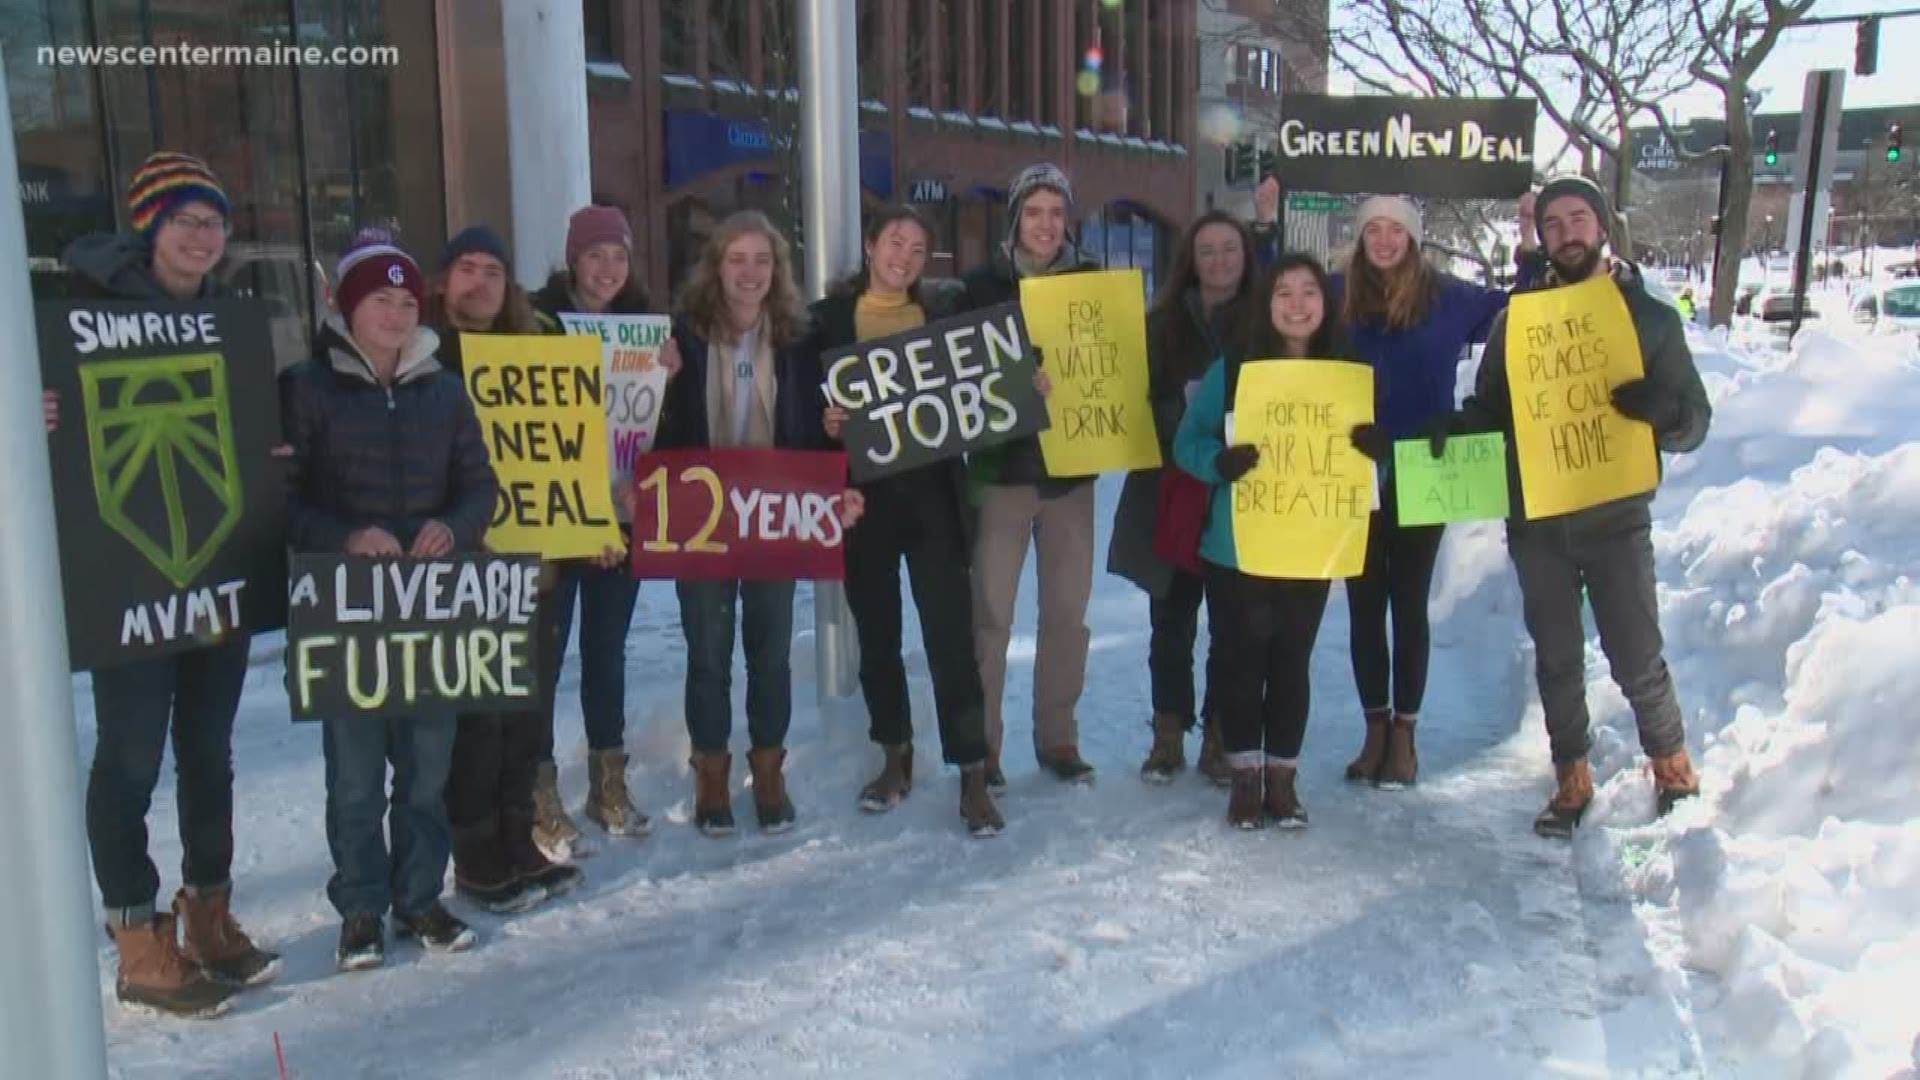 Students went to Maine lawmakers Wednesday to urge them to support a federal Green New Deal proposal.